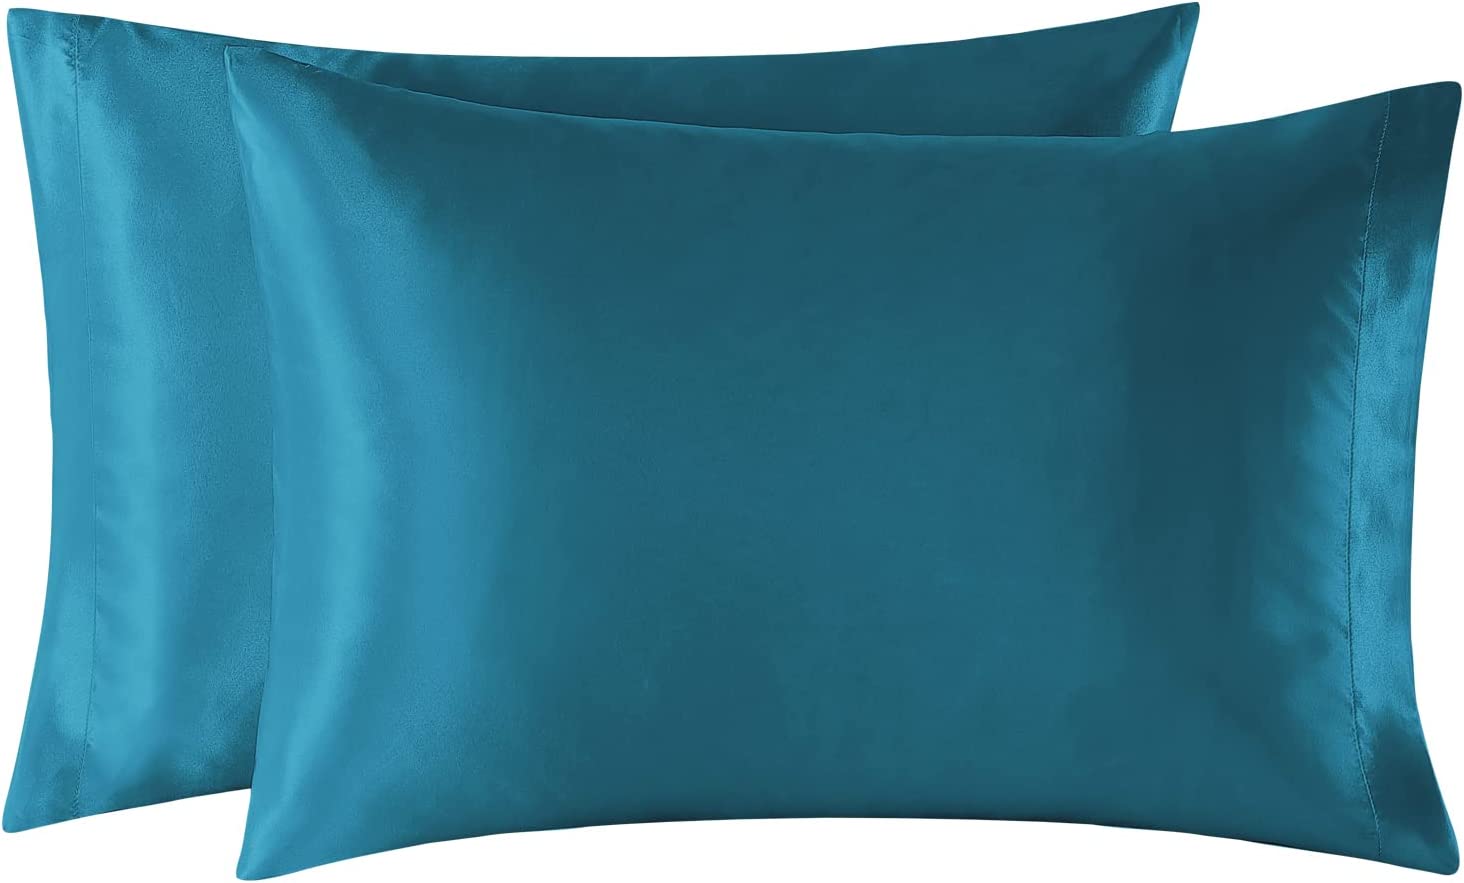 EXQ Home Machine Washable Smooth Satin Pillowcases, 2-Pack